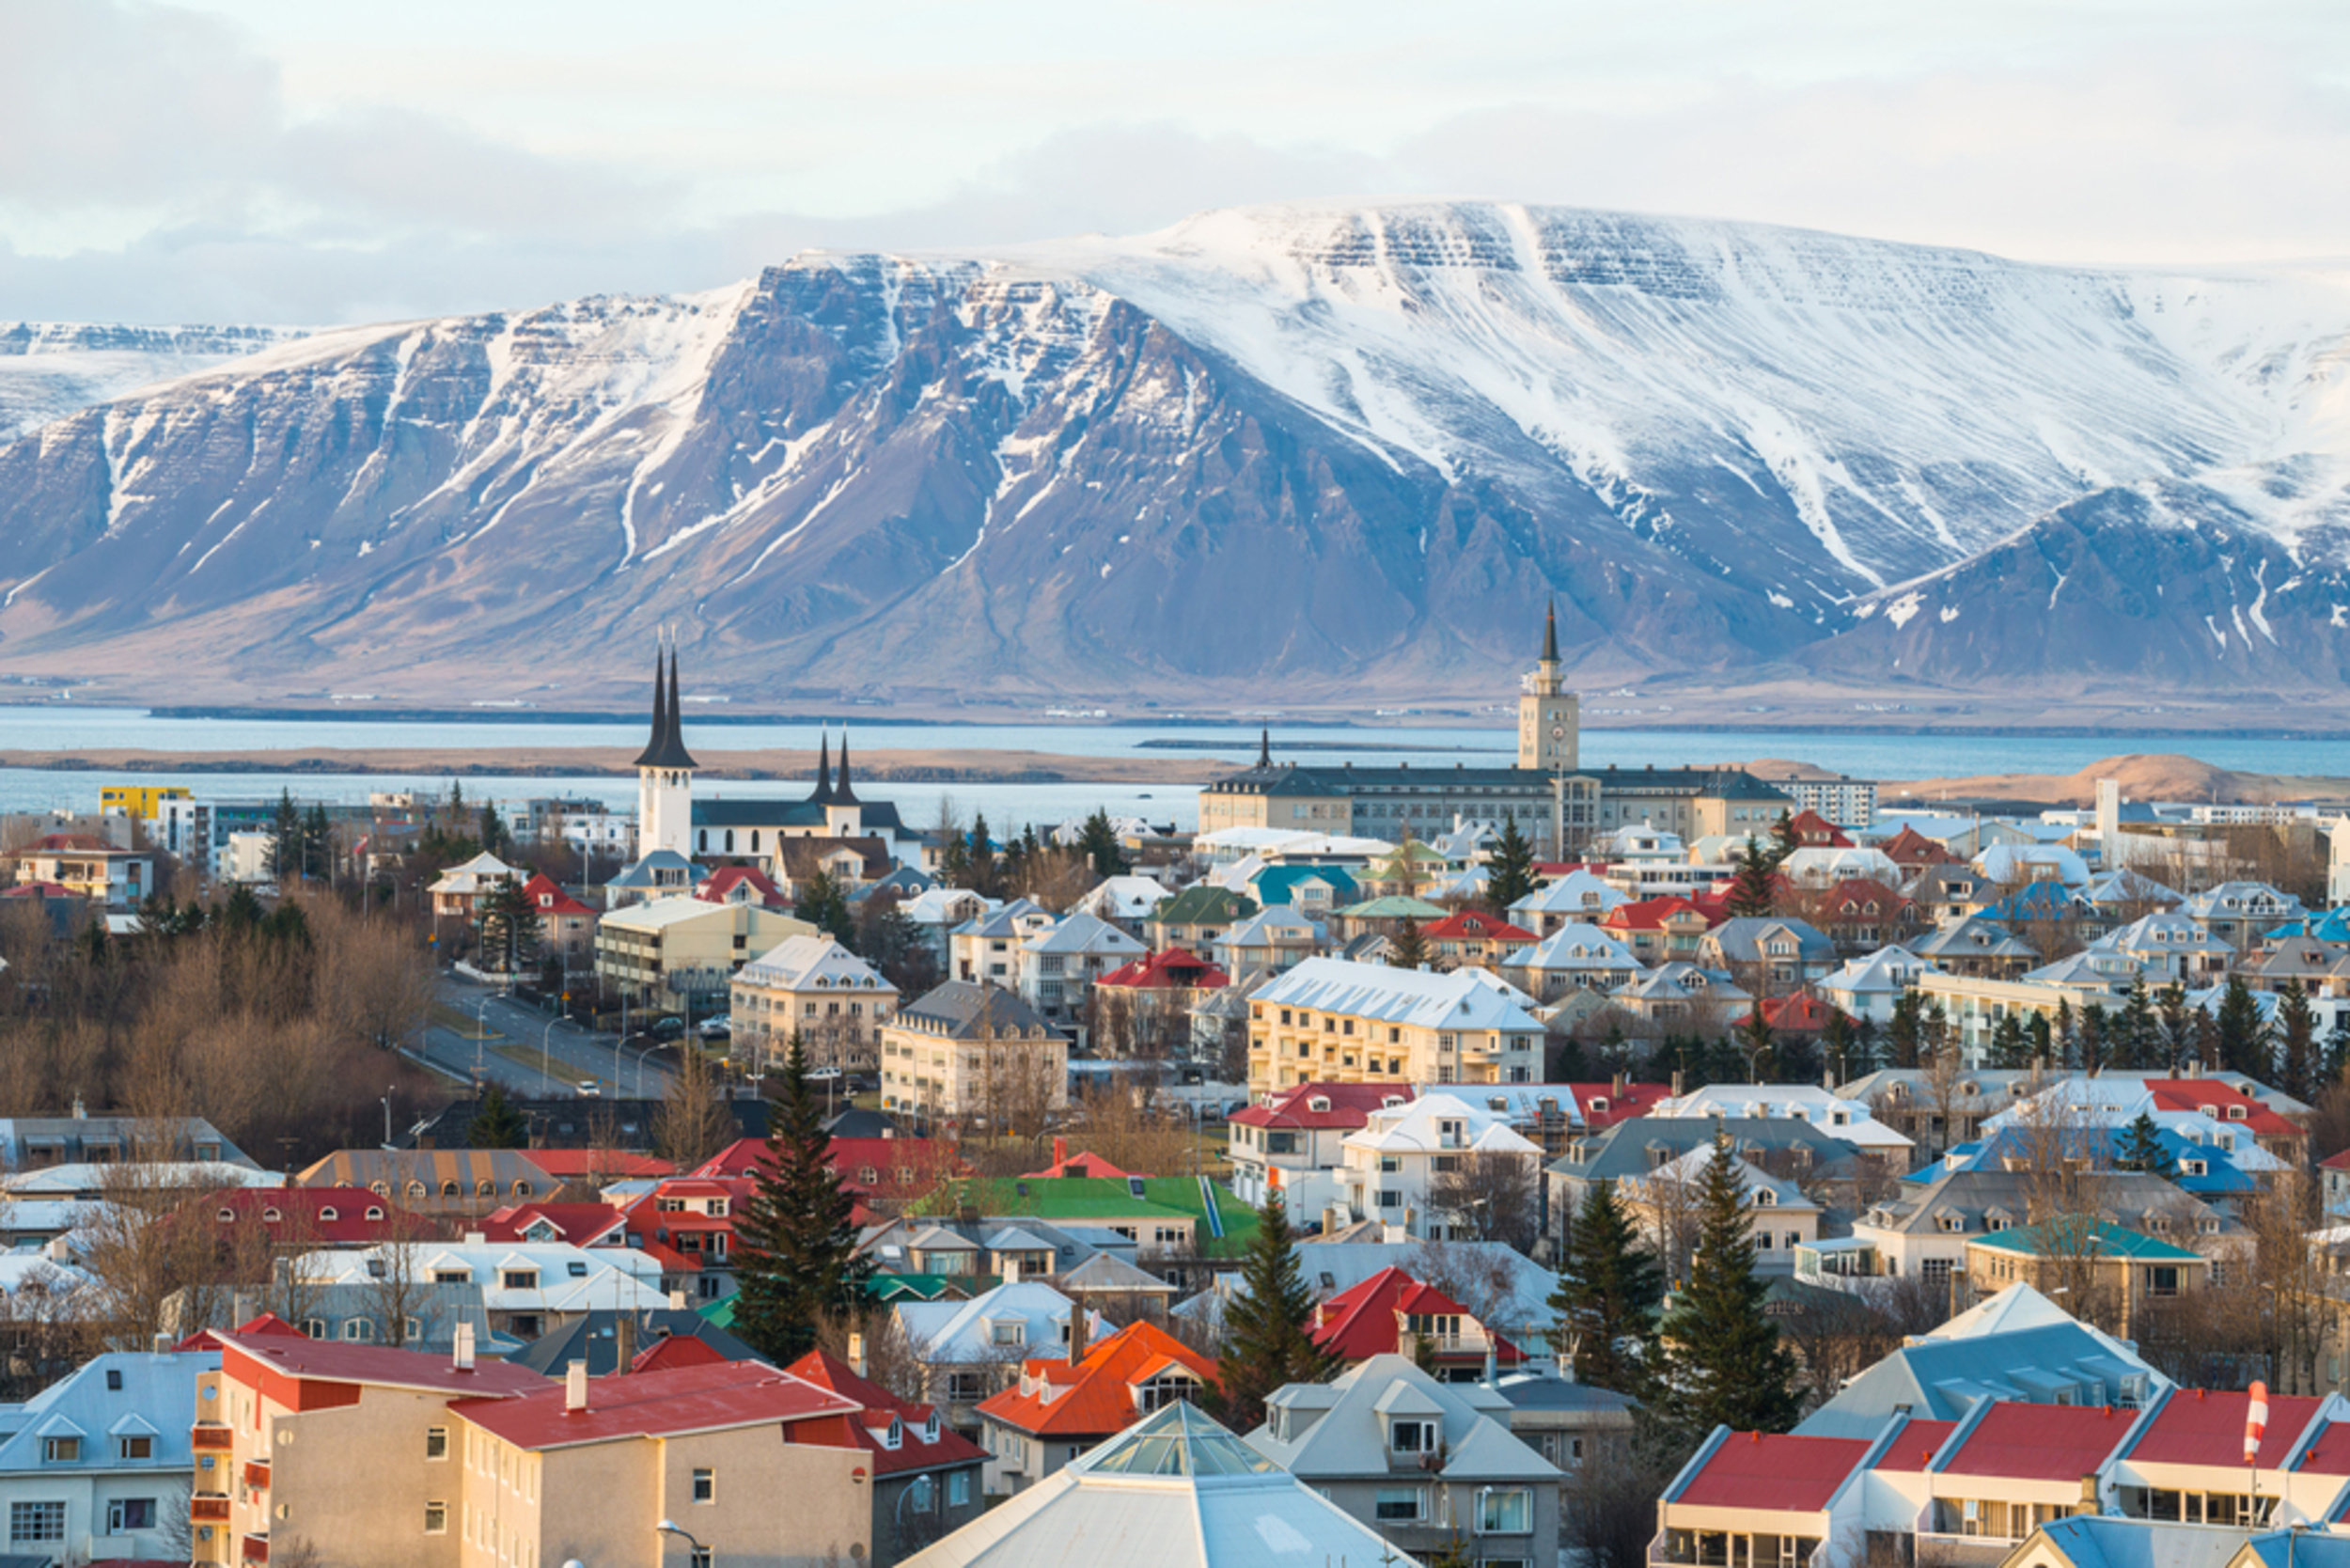 <p>Thanks in part to its lagoon spas and the opportunity to see the northern lights, among many other attractions, Iceland has become a wildly popular tourist destination in recent years. </p><p>You may also like: <a href='https://www.yardbarker.com/lifestyle/articles/20_holiday_slow_cooker_recipes_you_need_to_try_110623/s1__36371027'>20 holiday slow cooker recipes you need to try</a></p>